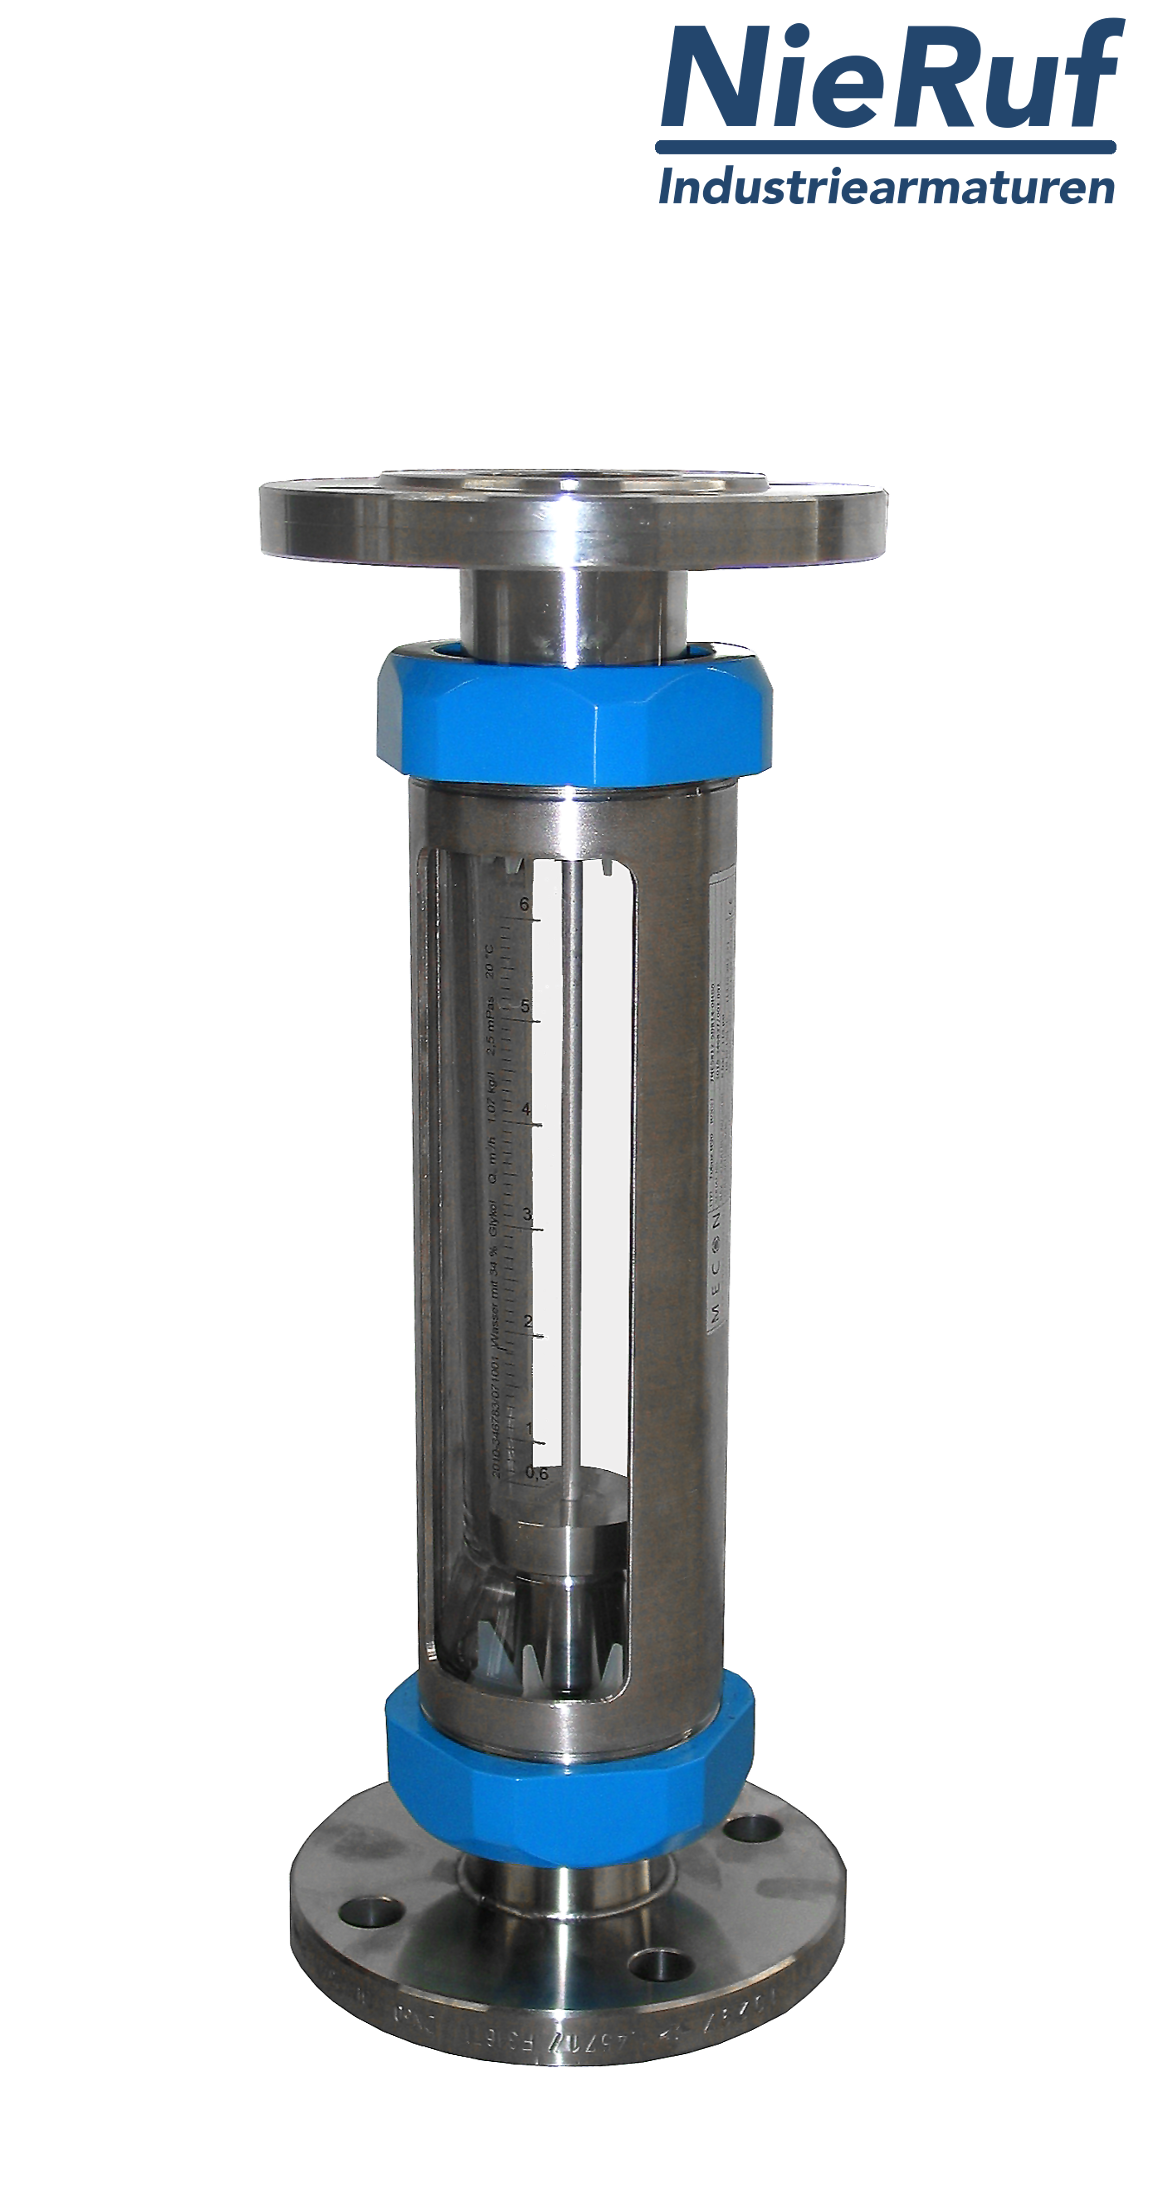 Variable area flowmeter stainless steel + borosilicate flange DN20 16.0 - 160 l/h water FKM